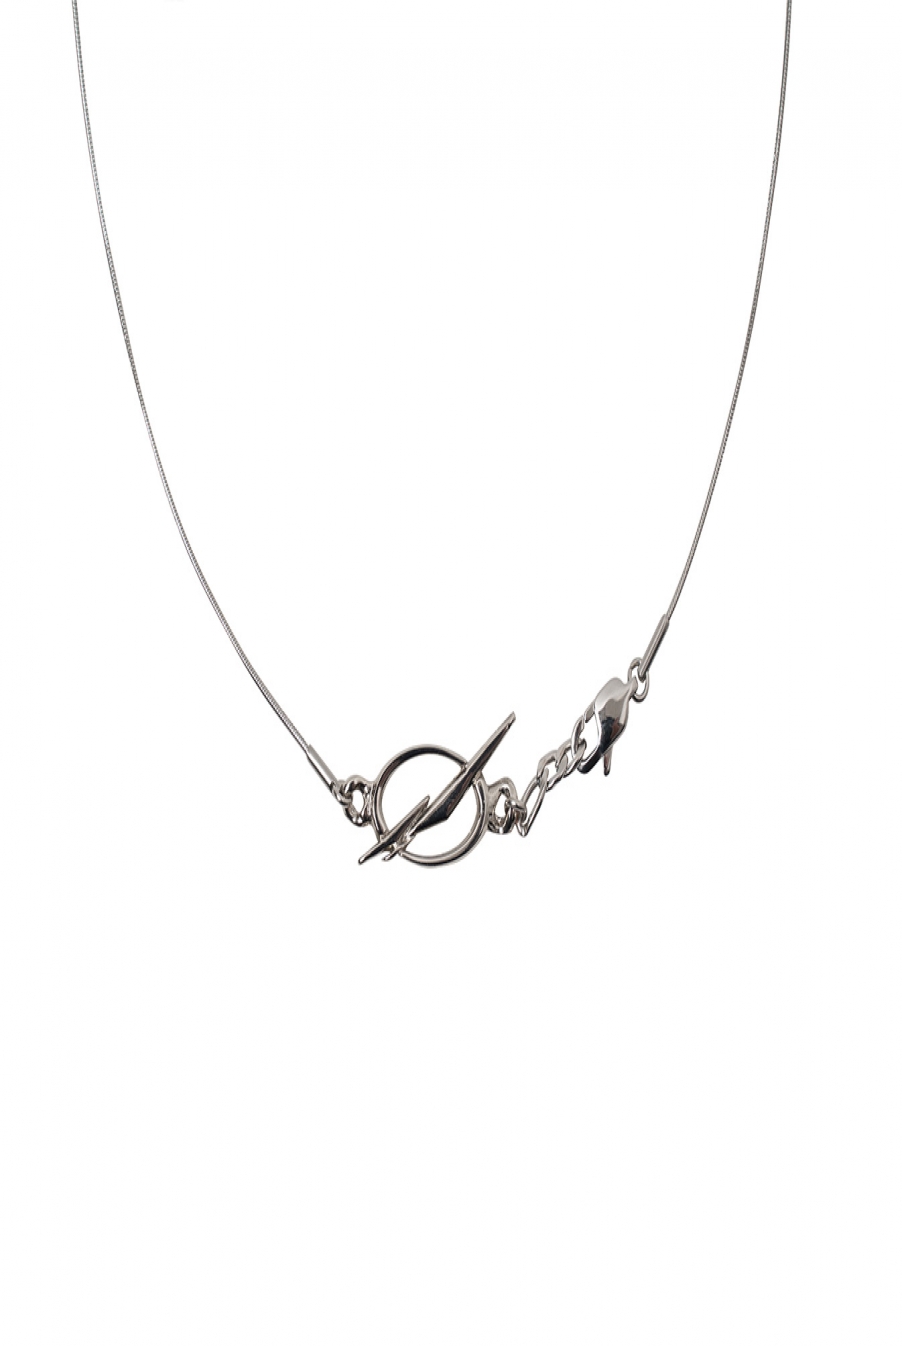 Chain Logo Necklace (thin)